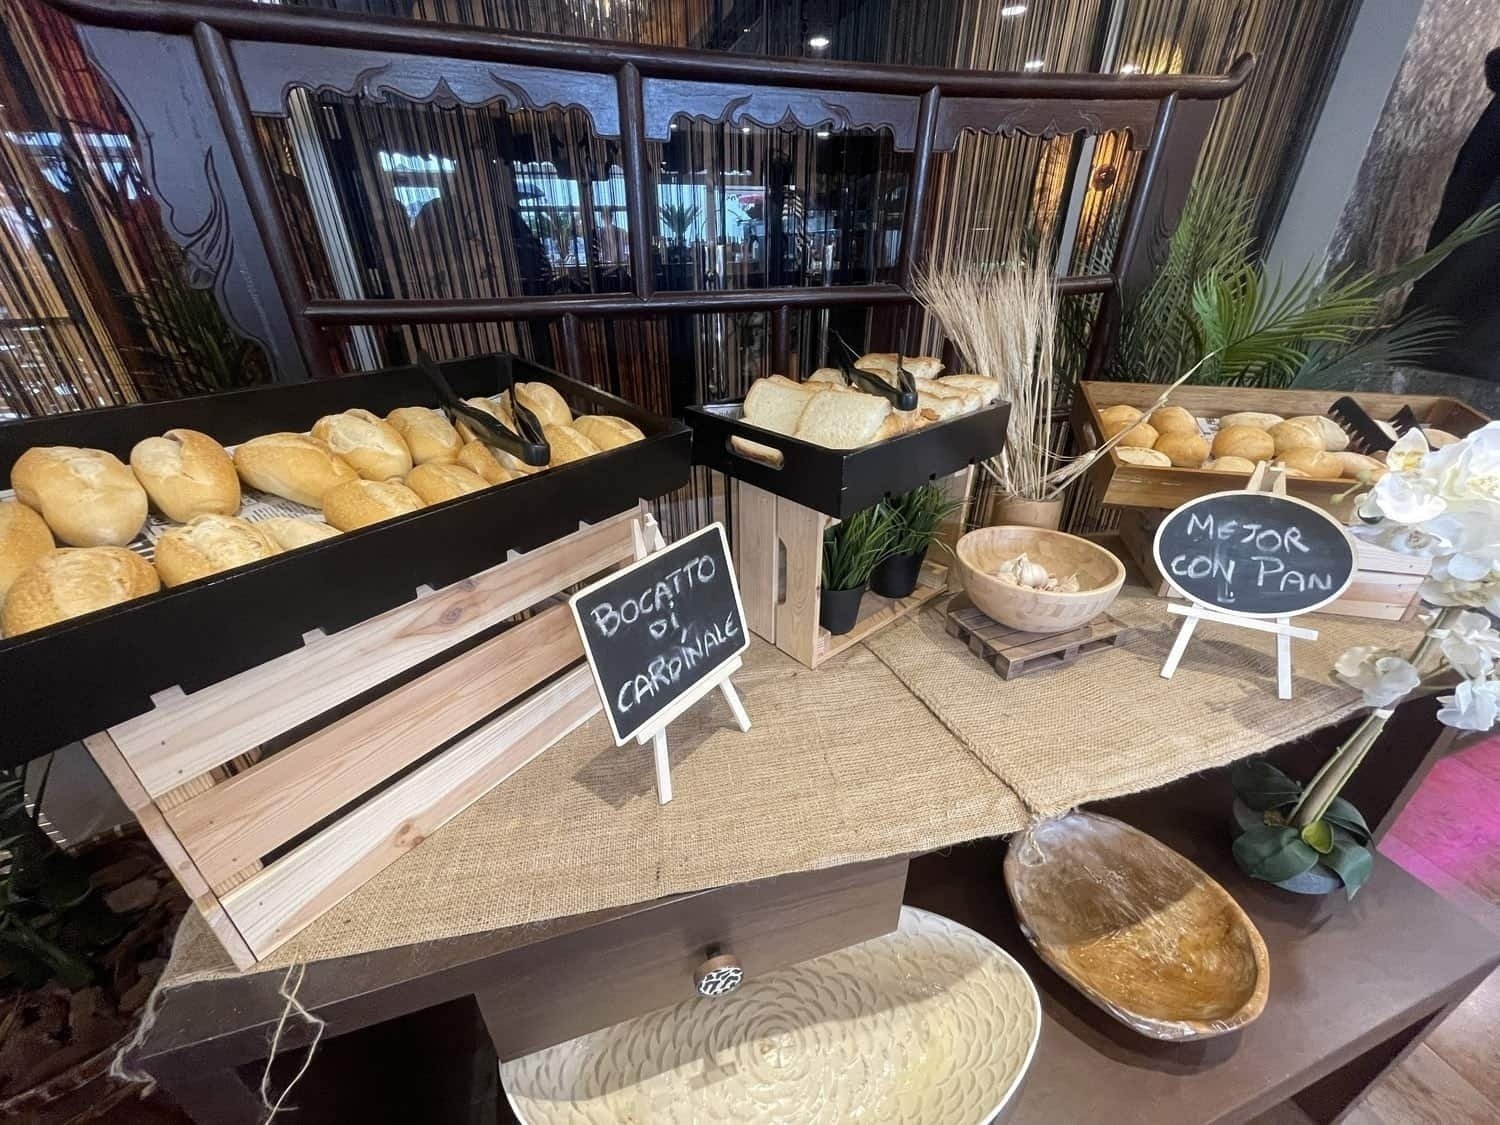 a display of bread including bocato and mejor con pan